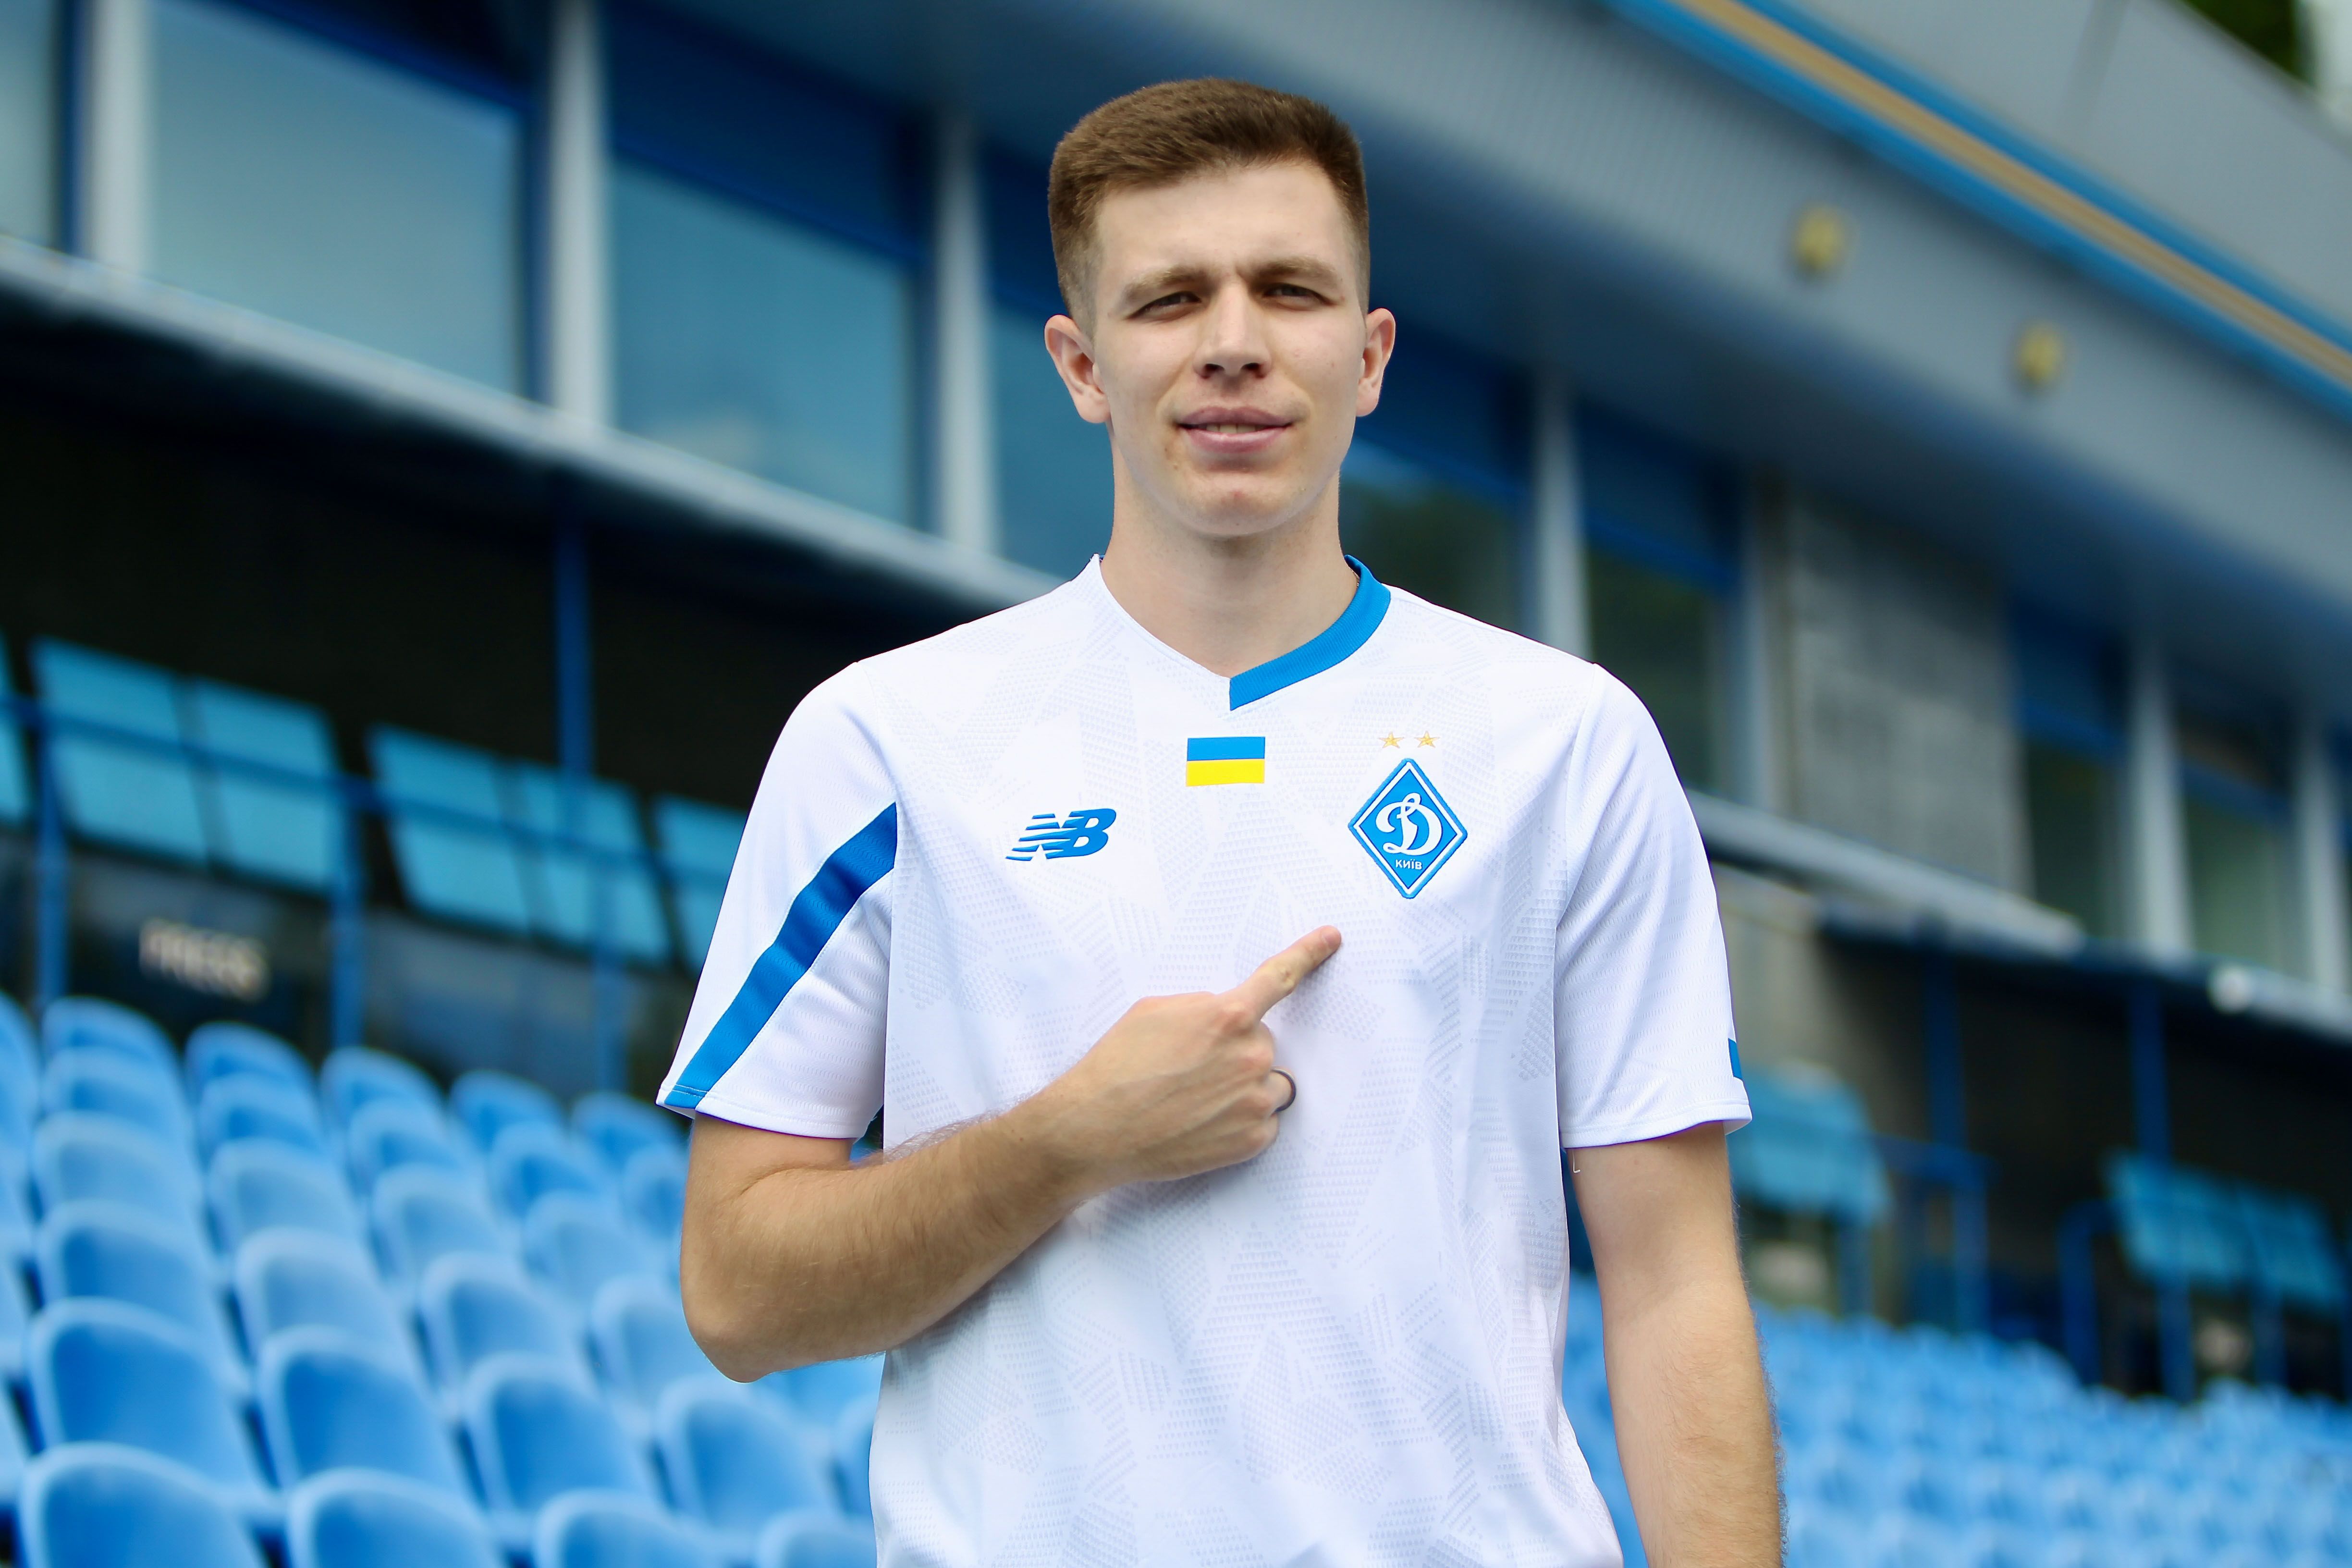 Oleksandr Pikhalionok: “Dynamo jersey is a different level and responsibility”